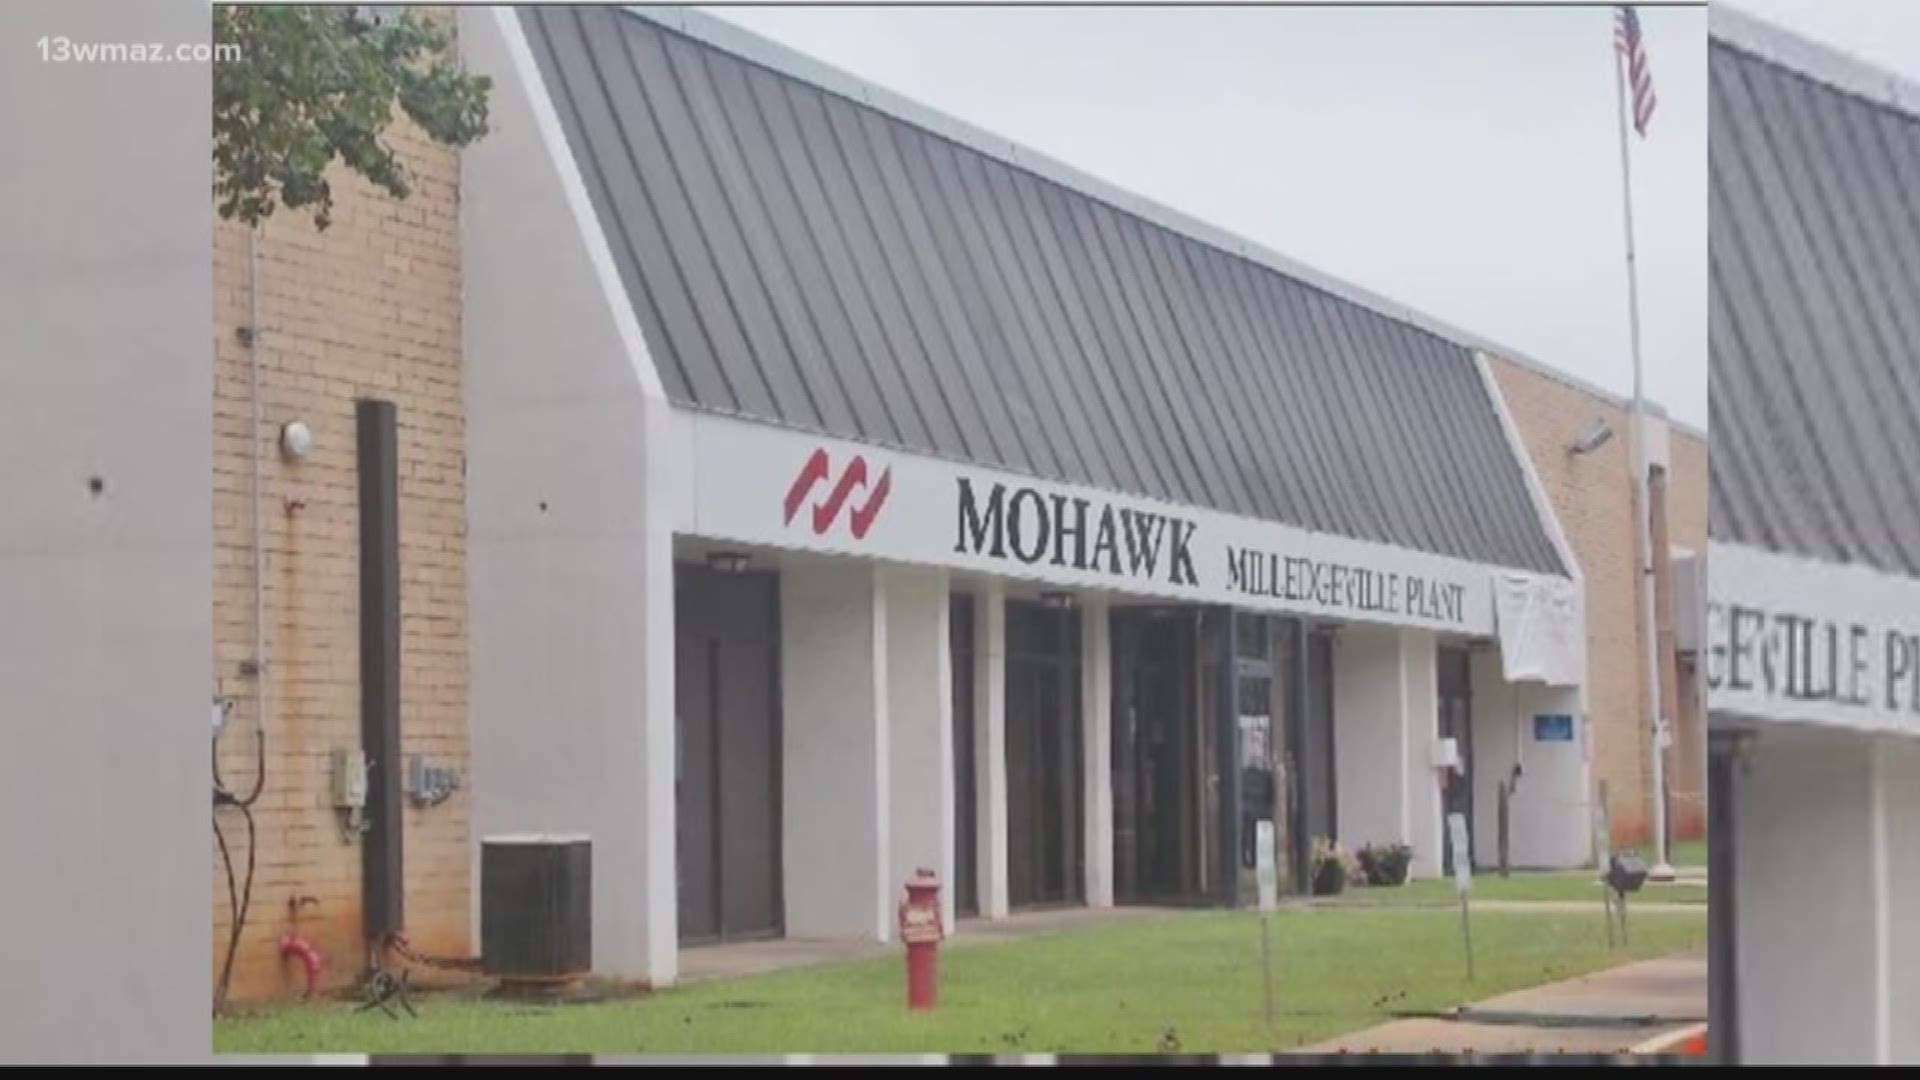 Around 200 people will lose their jobs as Mohawk closes its yarn plant in Milledgeville.